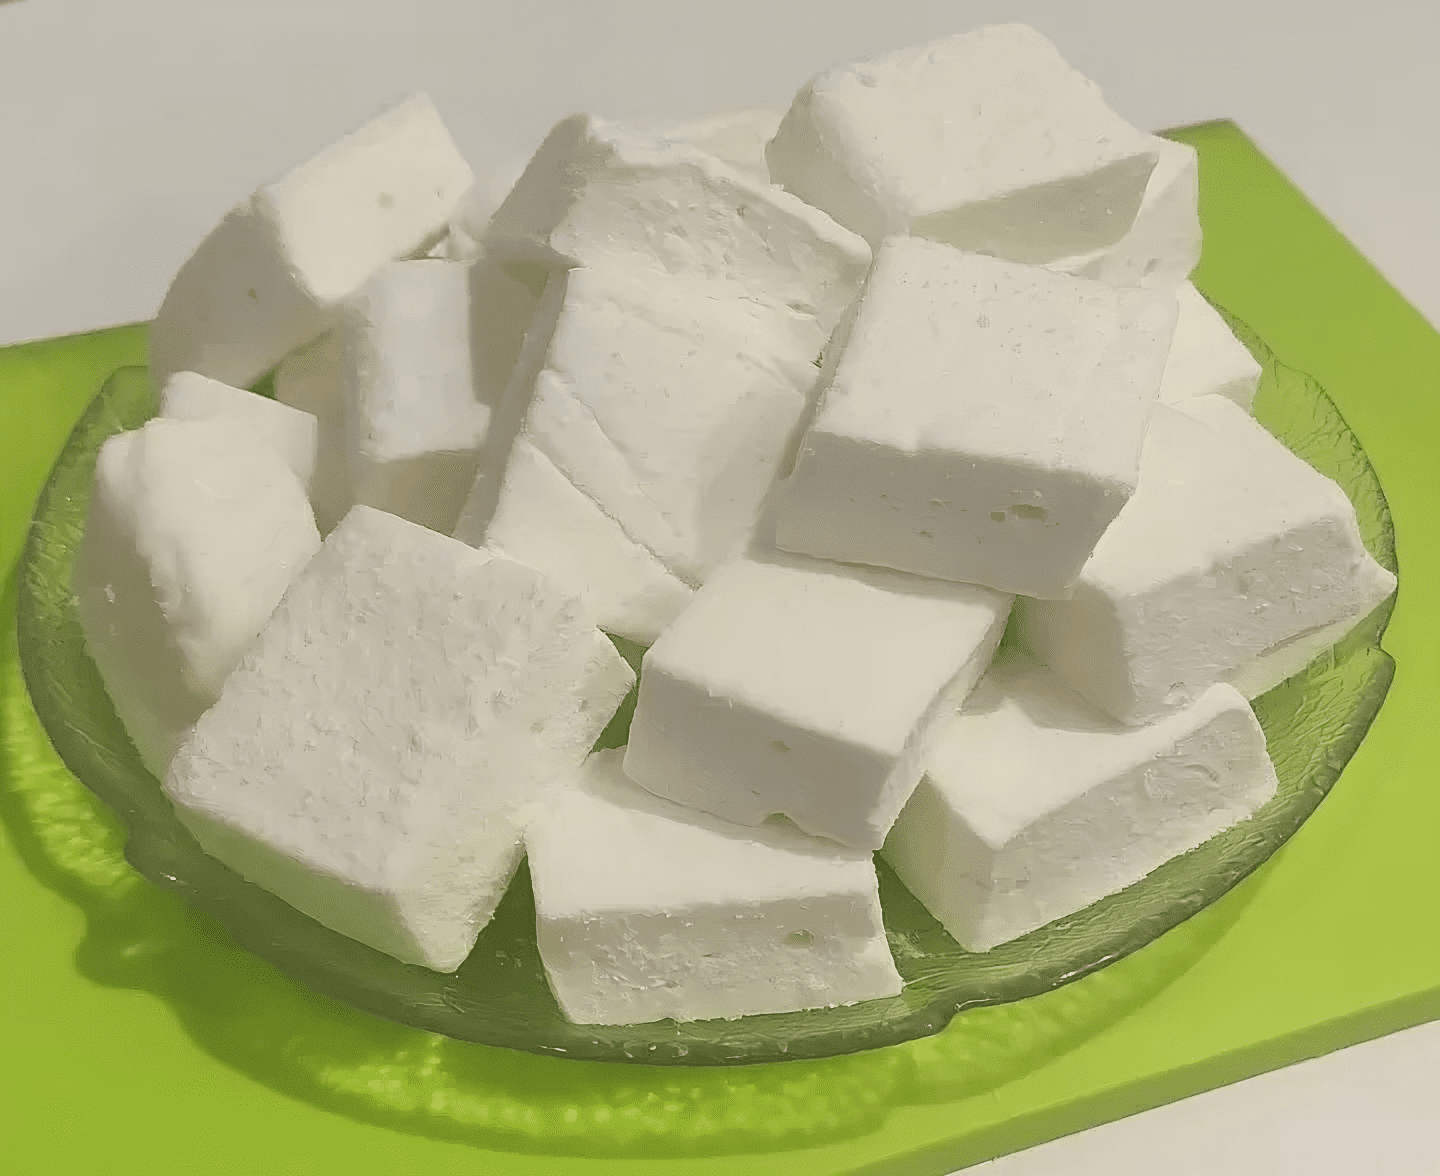 Marvelous Homemade Marshmallow! Delicious and Natural!